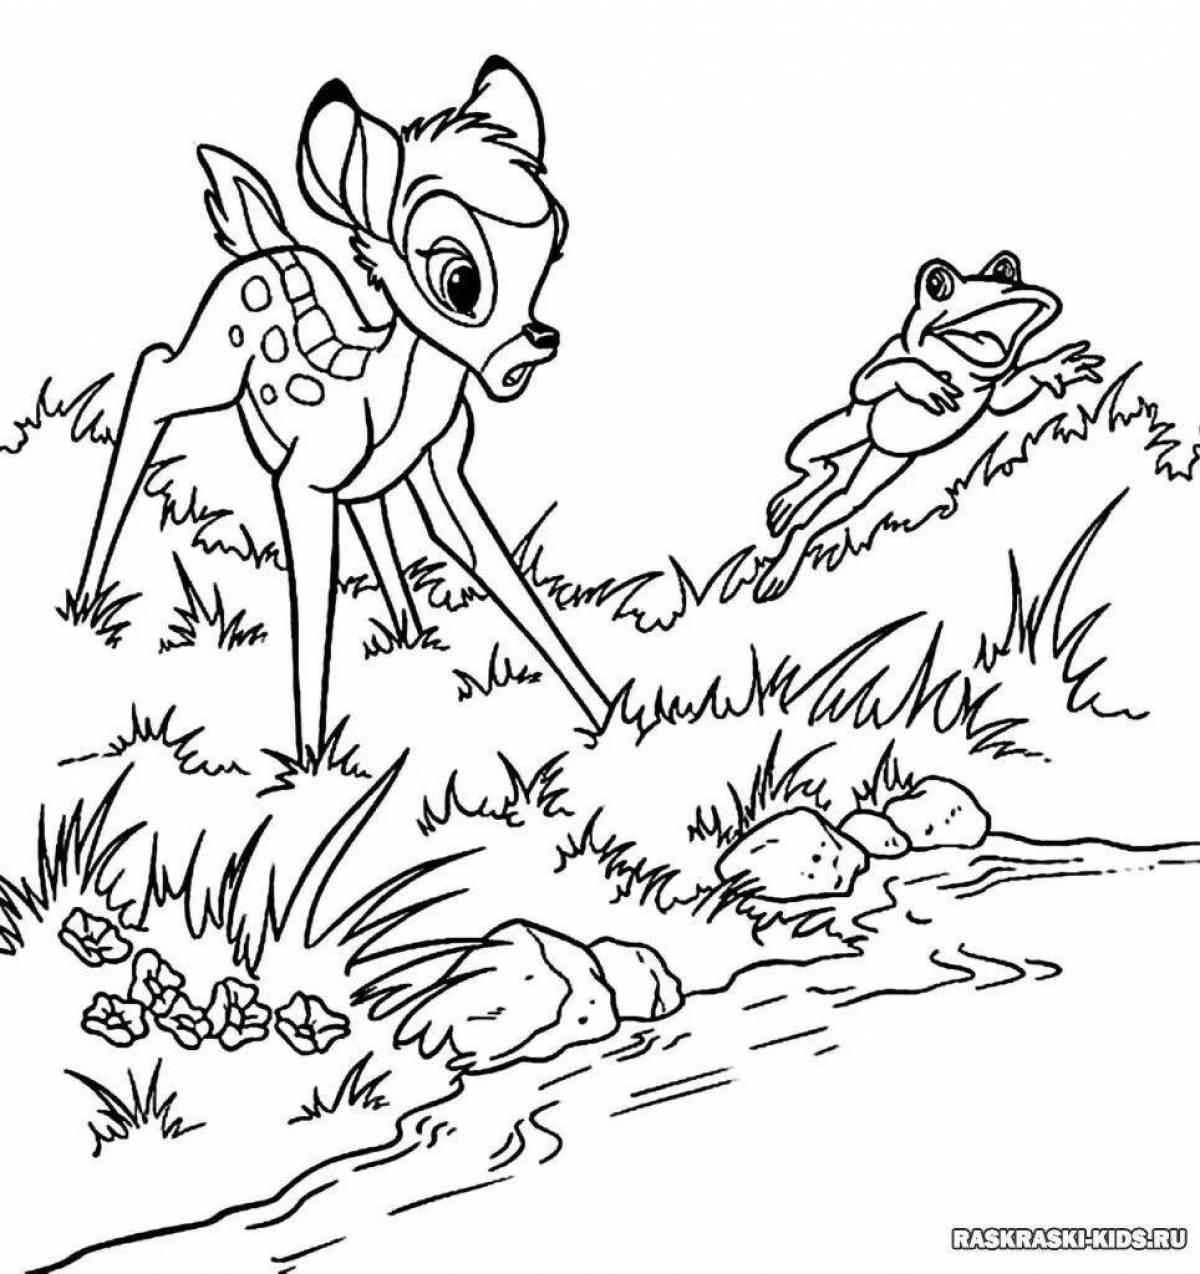 Wonderful bambi coloring book for kids 3-4 years old